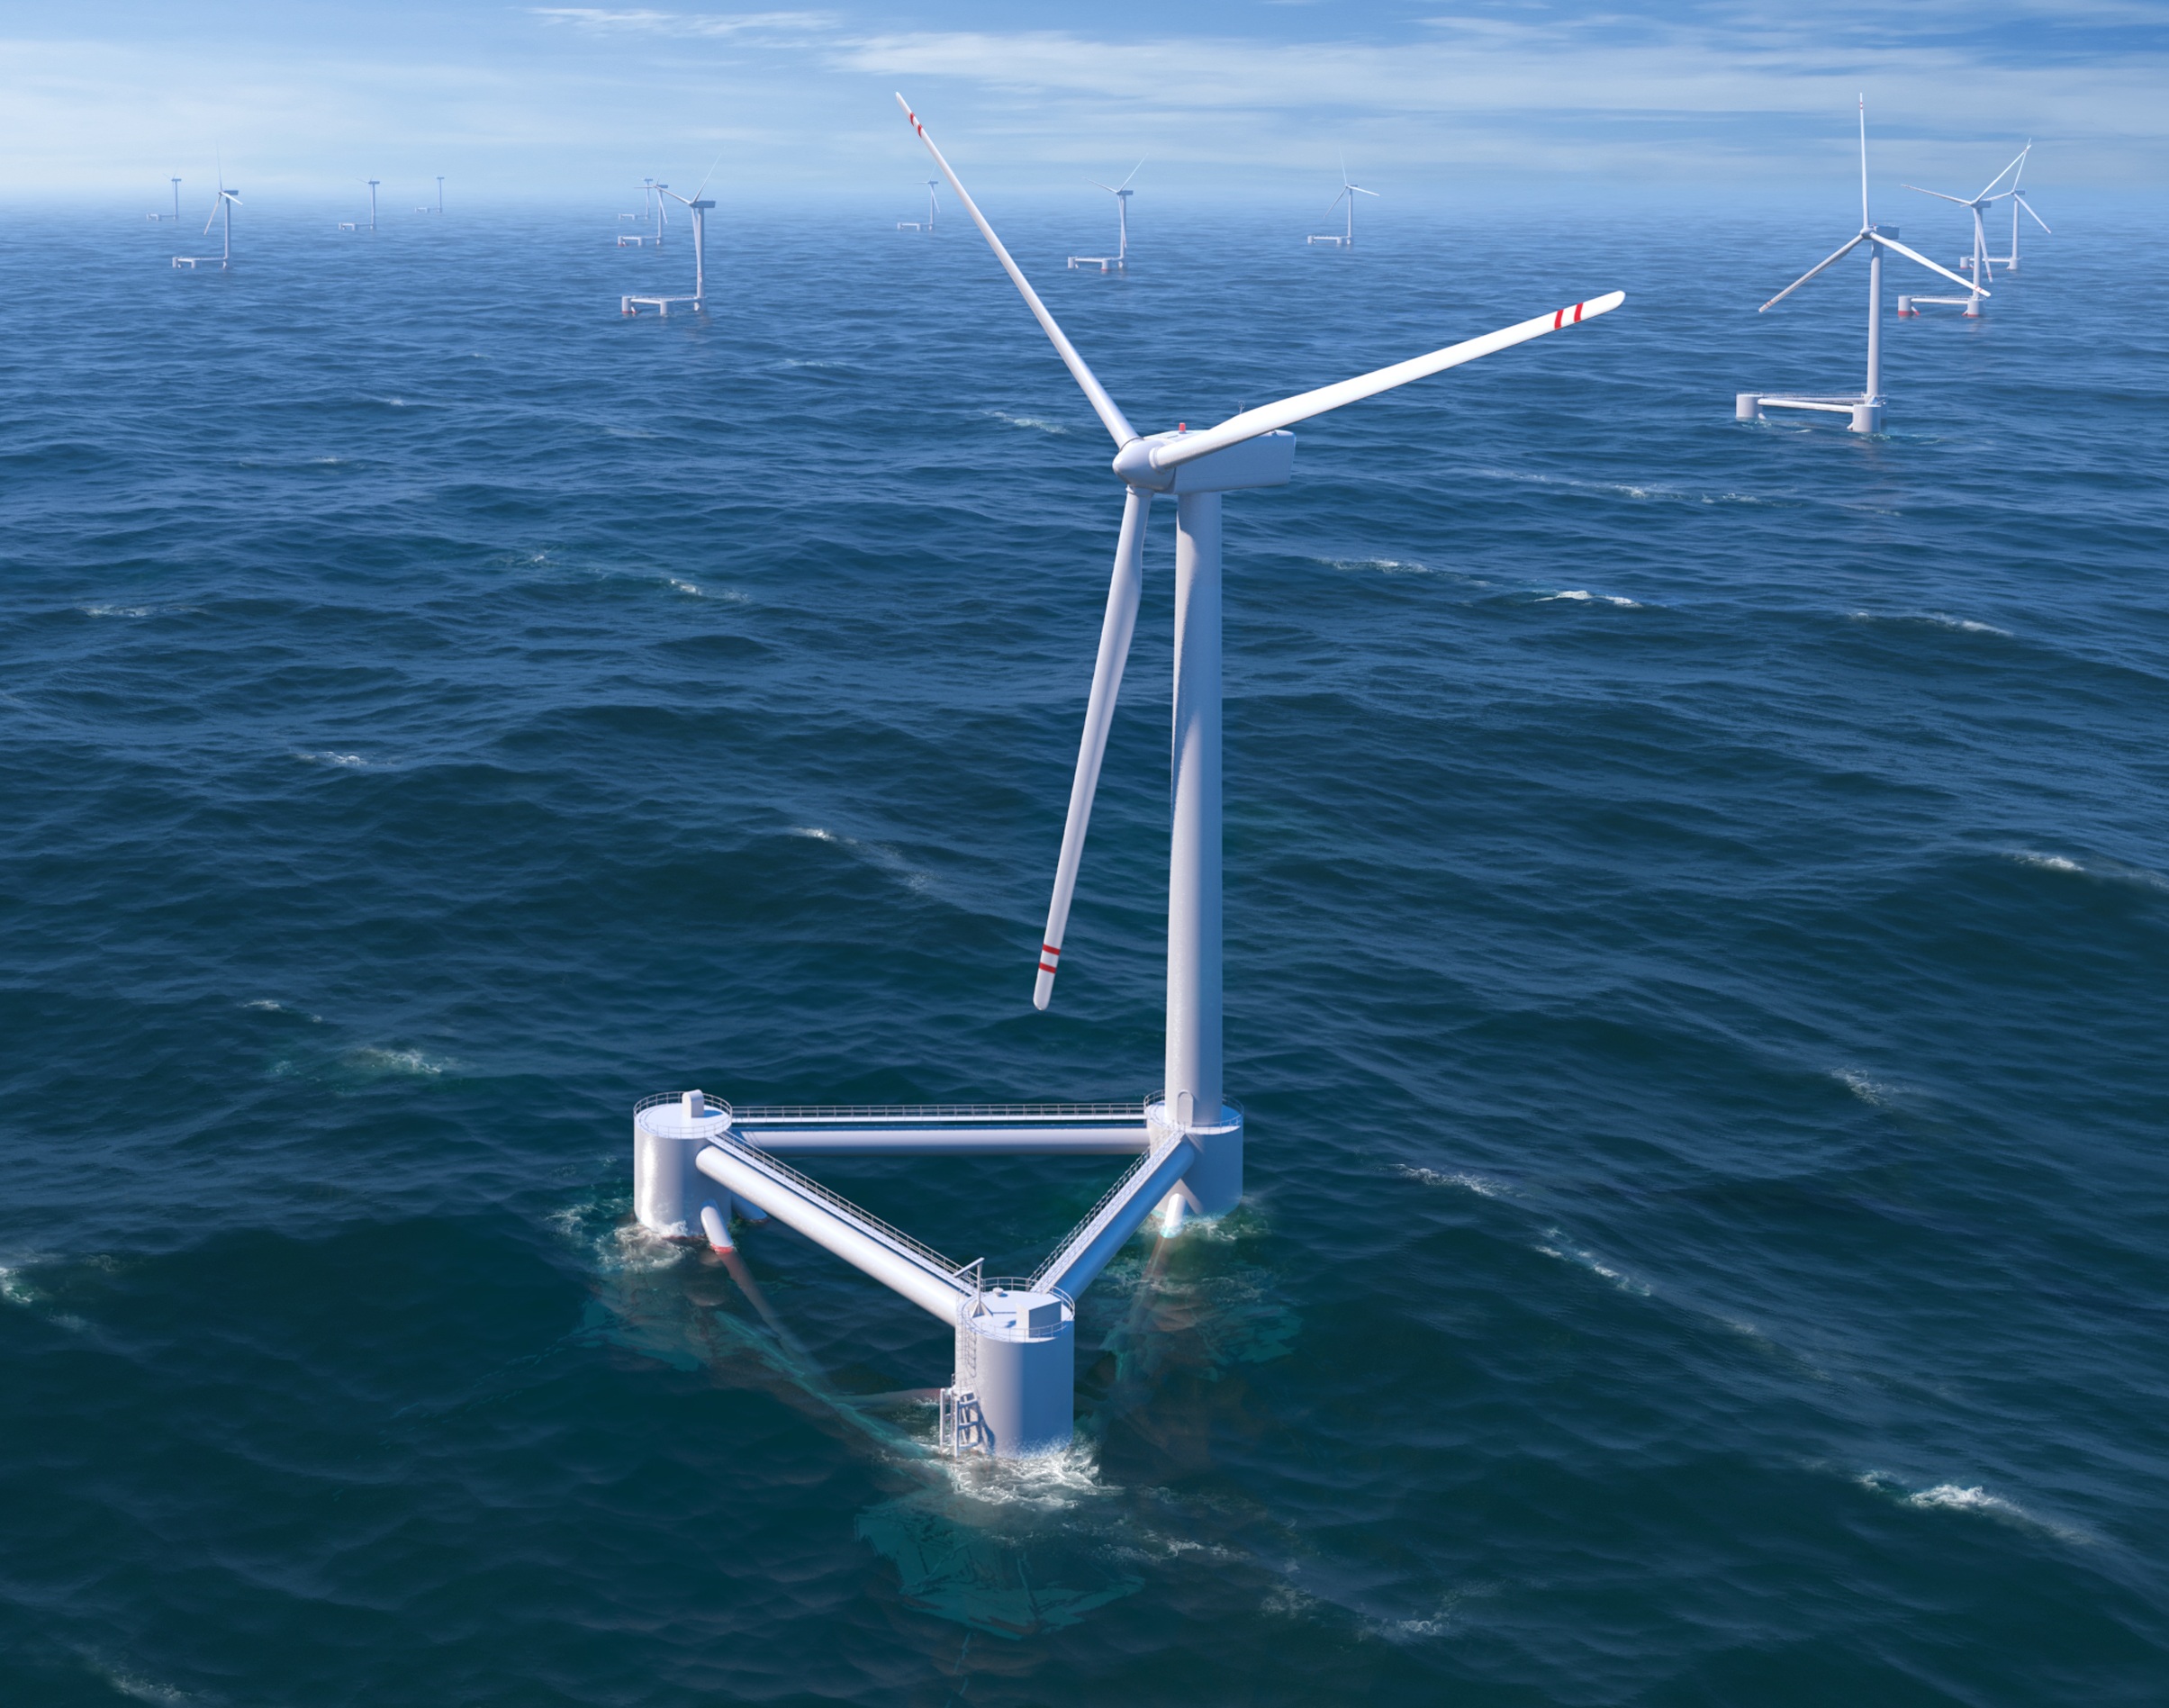 A Mighty Wind a Blowin’: Offshore Wind Energy in Oregon